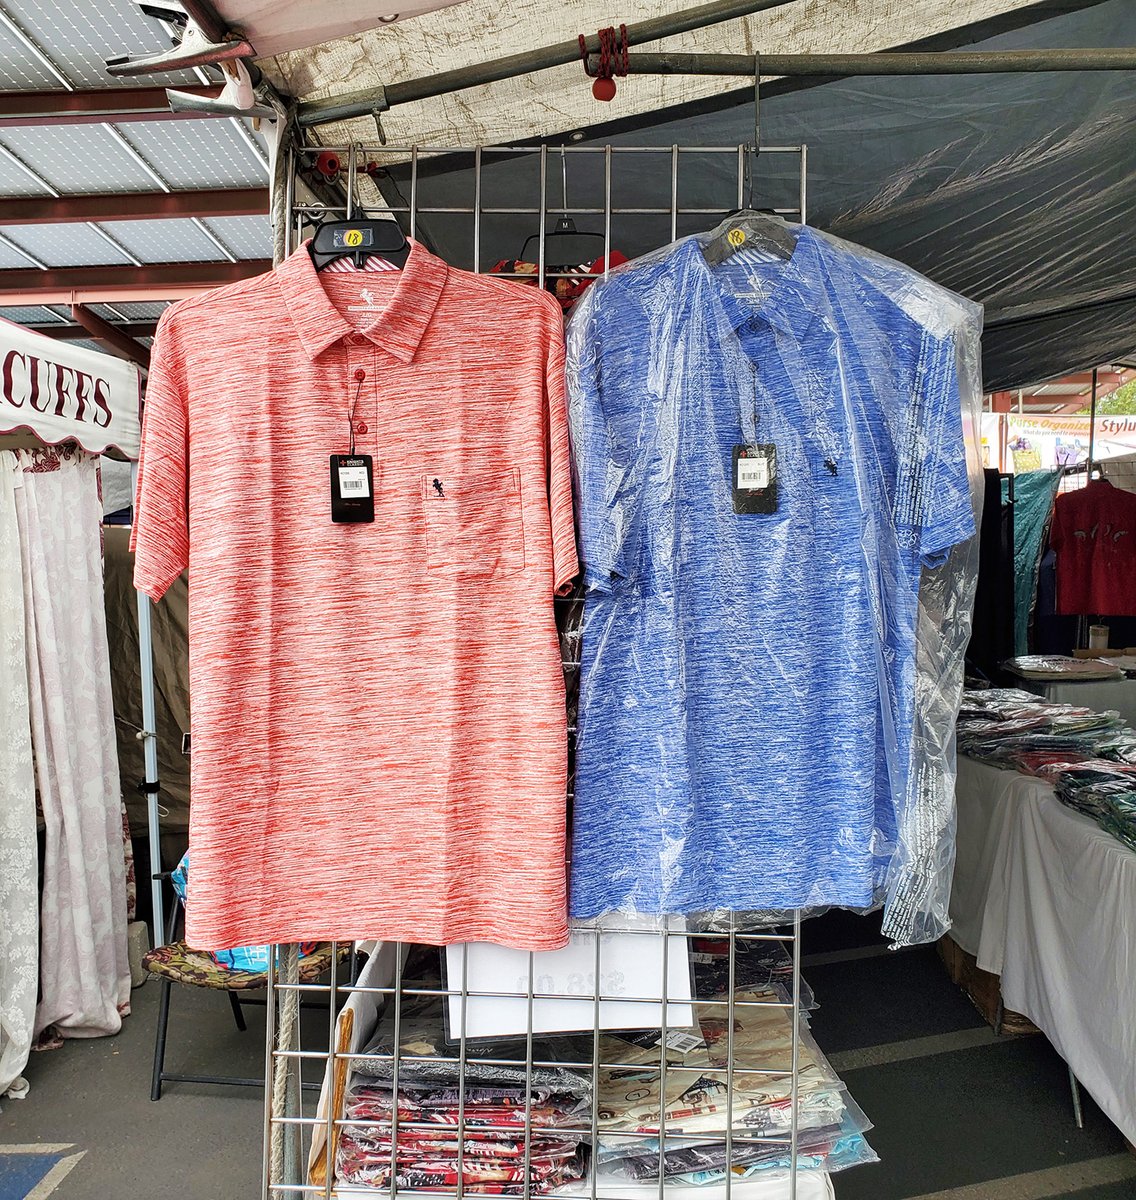 ⛳️👞 Swing by The Street Fair in Palm Desert and elevate your style game with an unbeatable selection of men's fashion and golf attire! From khakis to casual chic, we've got the threads to make you stand out from the crowd. #thingstodoinpalmdesert #outdoorshopping #streetfair